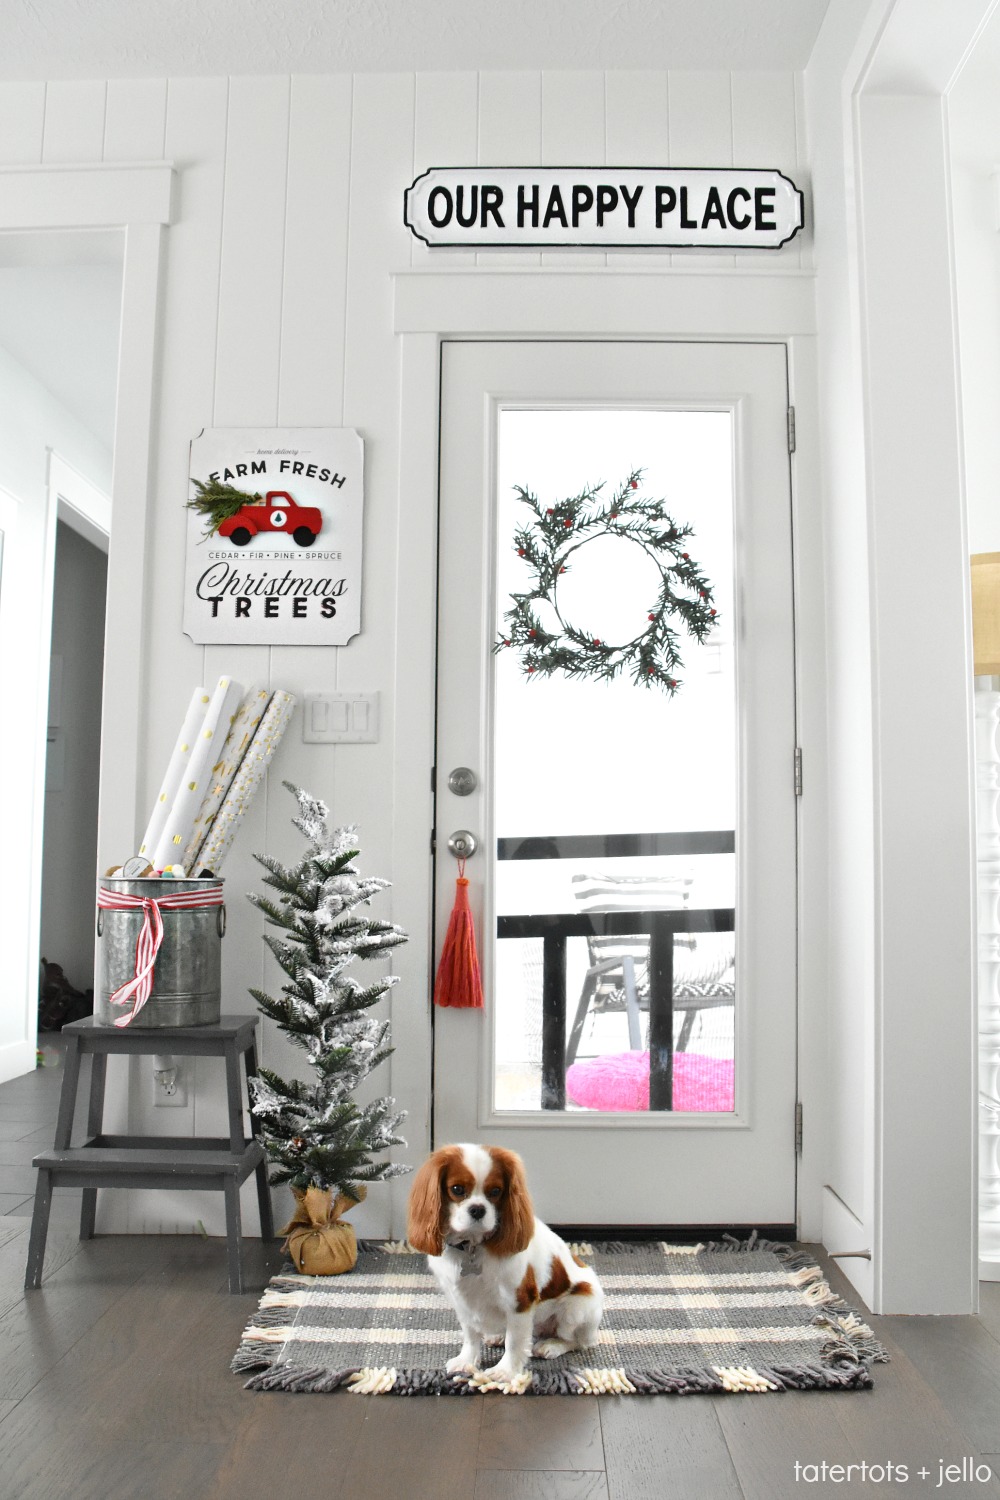 Bright and Colorful Holiday Home Tour. Easy ways to celebrate the holidays with color. Simple DIY ideas you can make to bring the spirit of Christmas into your home this holiday season!